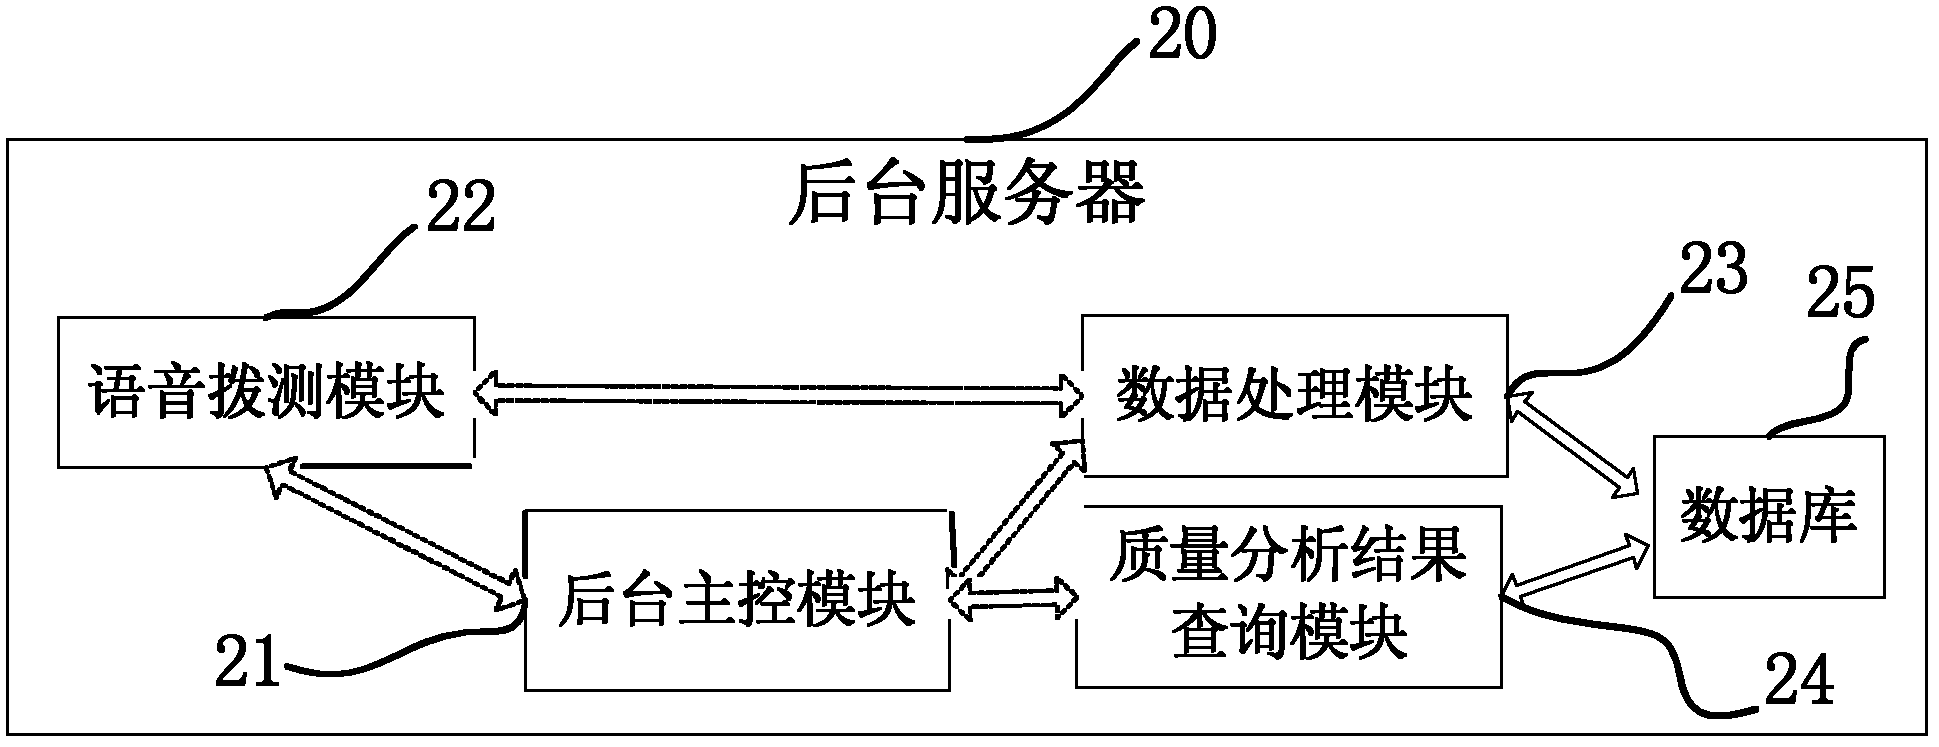 Mobile network quality automatic monitoring system and method for GSM and 3G